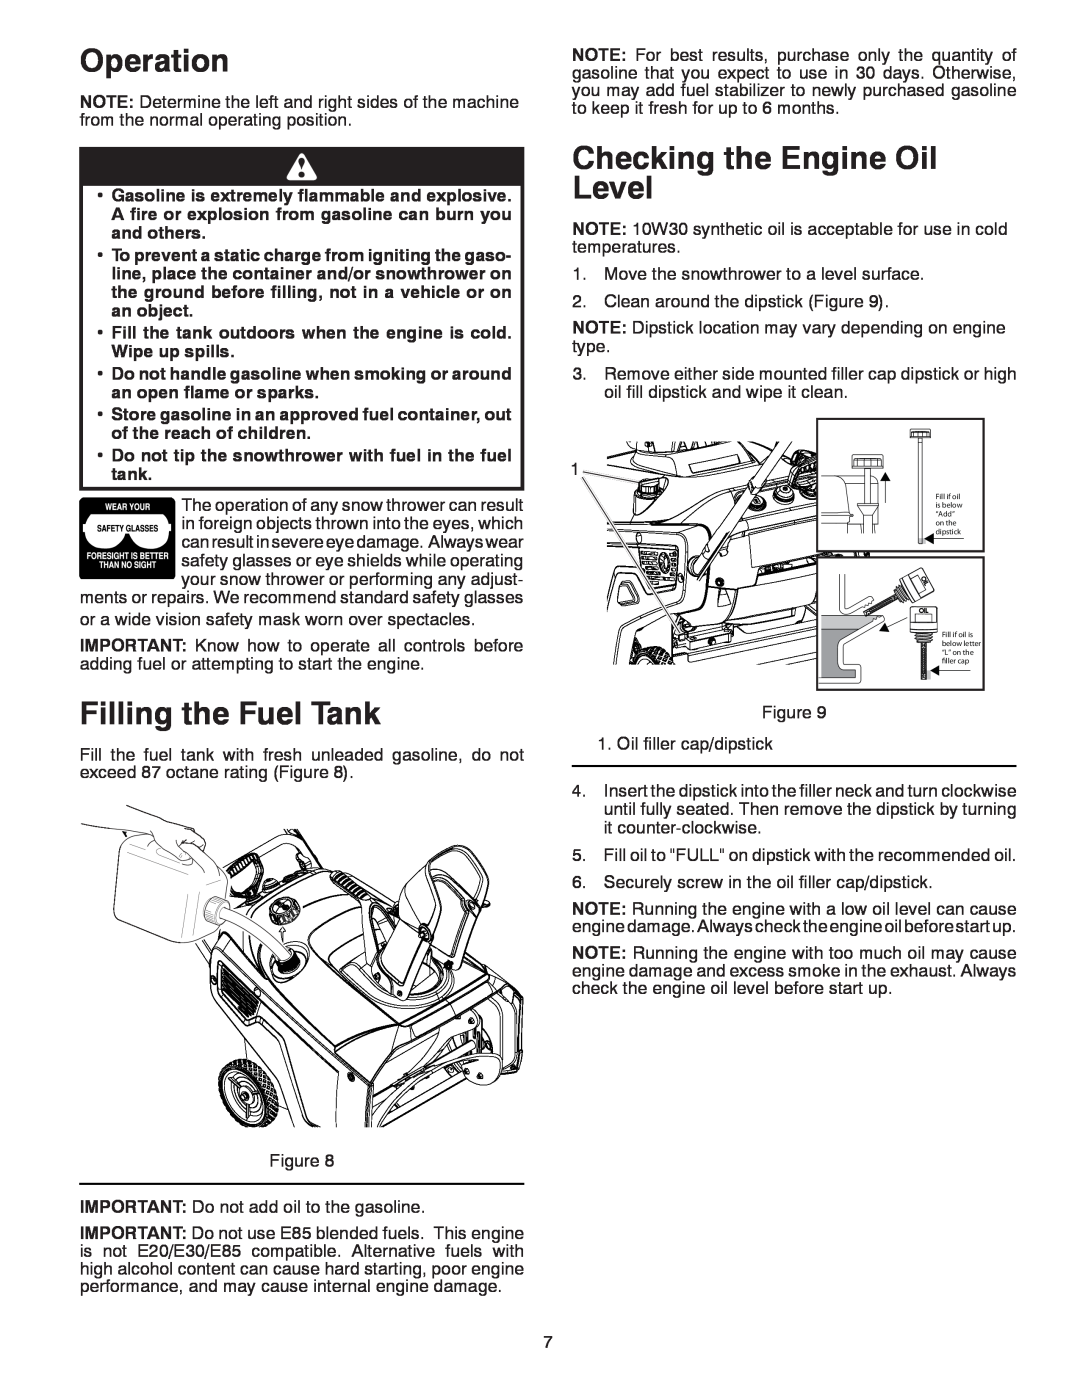 Poulan 96182000400, 436439, PR621ES owner manual Operation, Filling the Fuel Tank, Checking the Engine Oil Level 